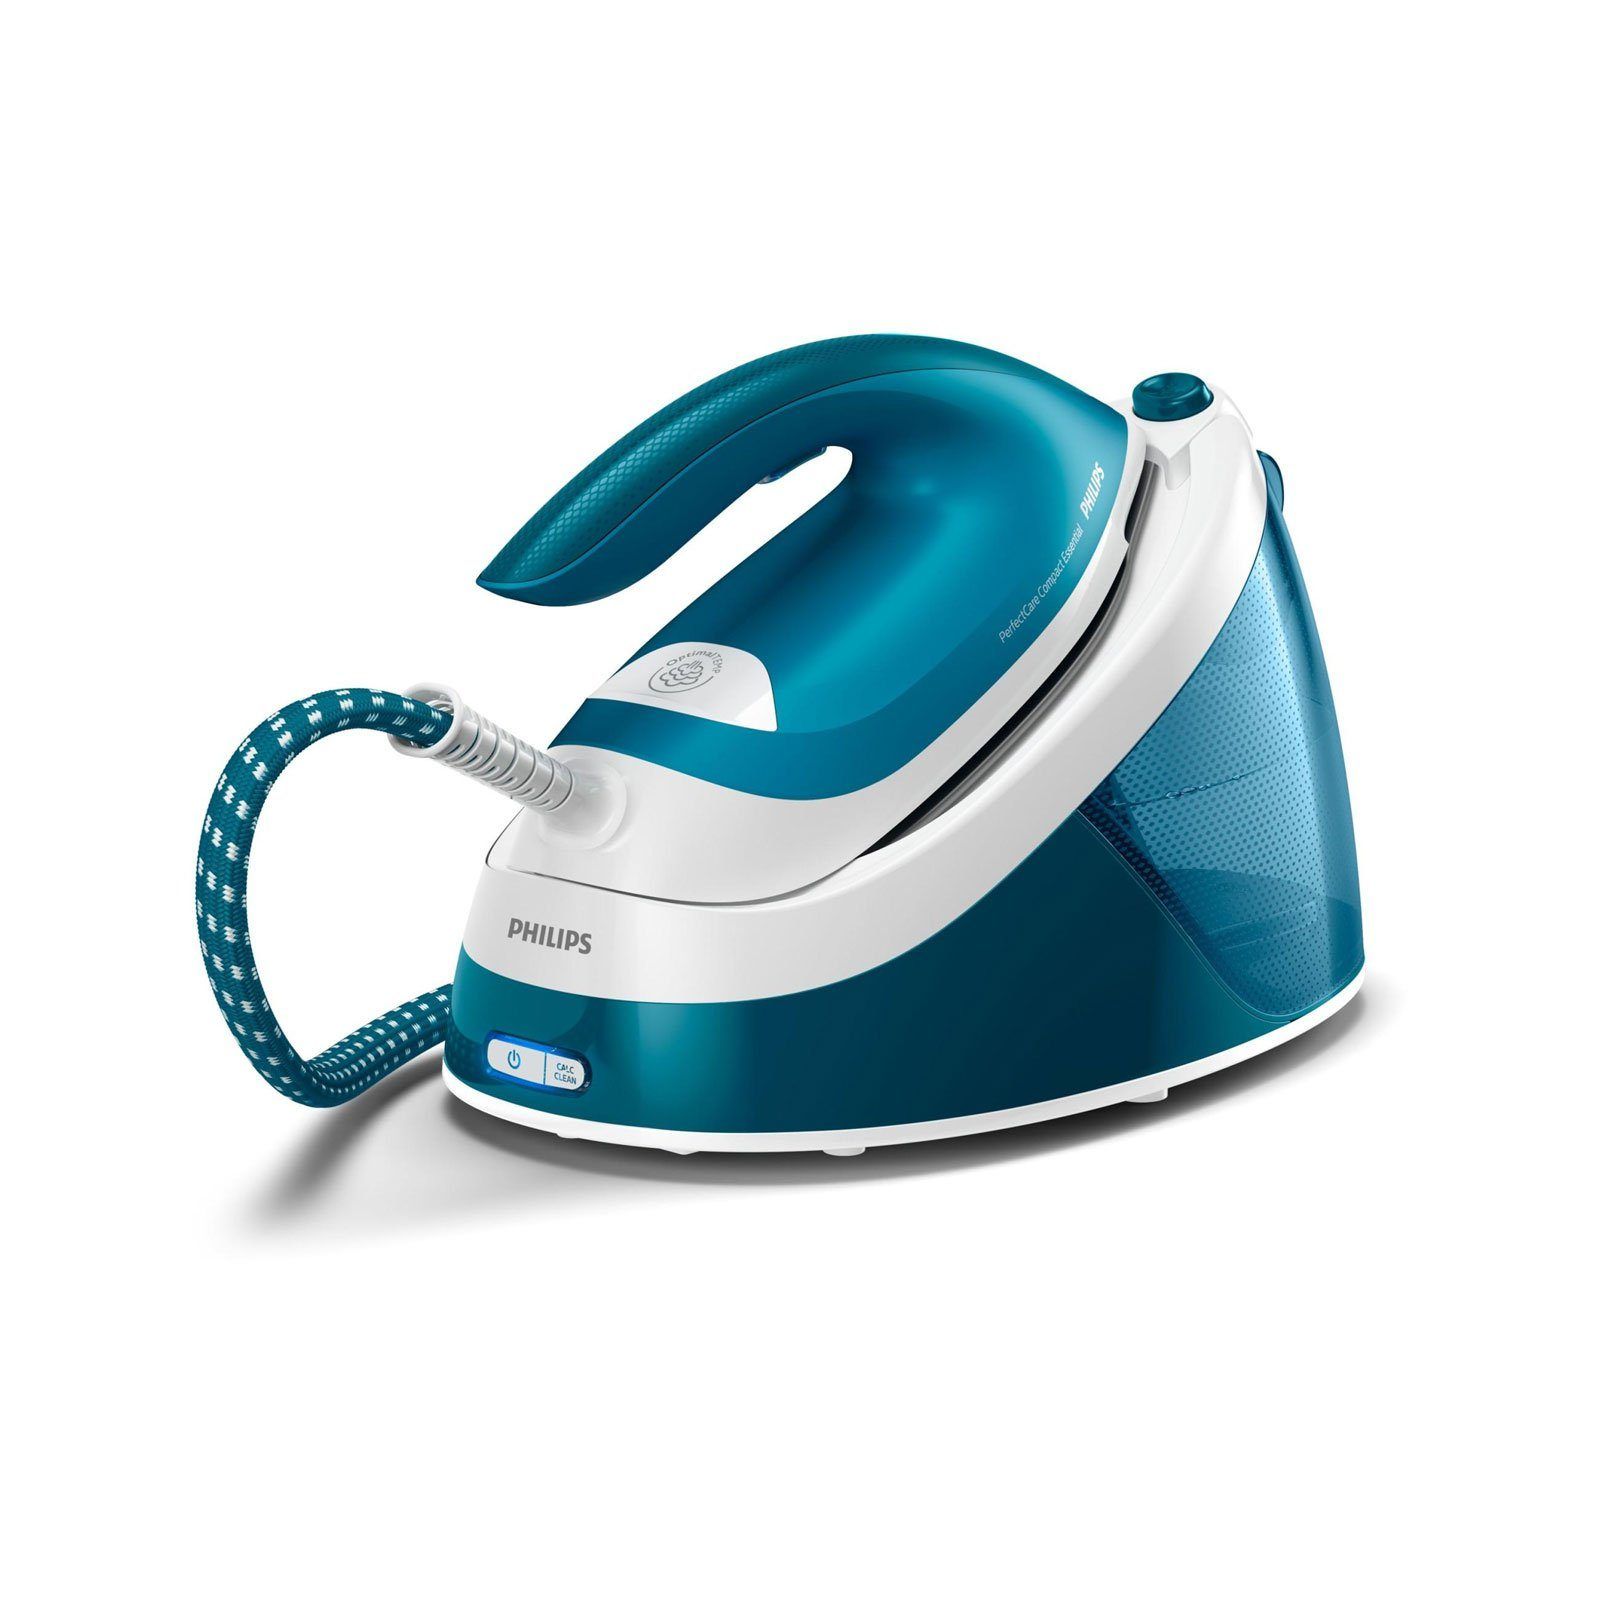 Steam generator irons review фото 59